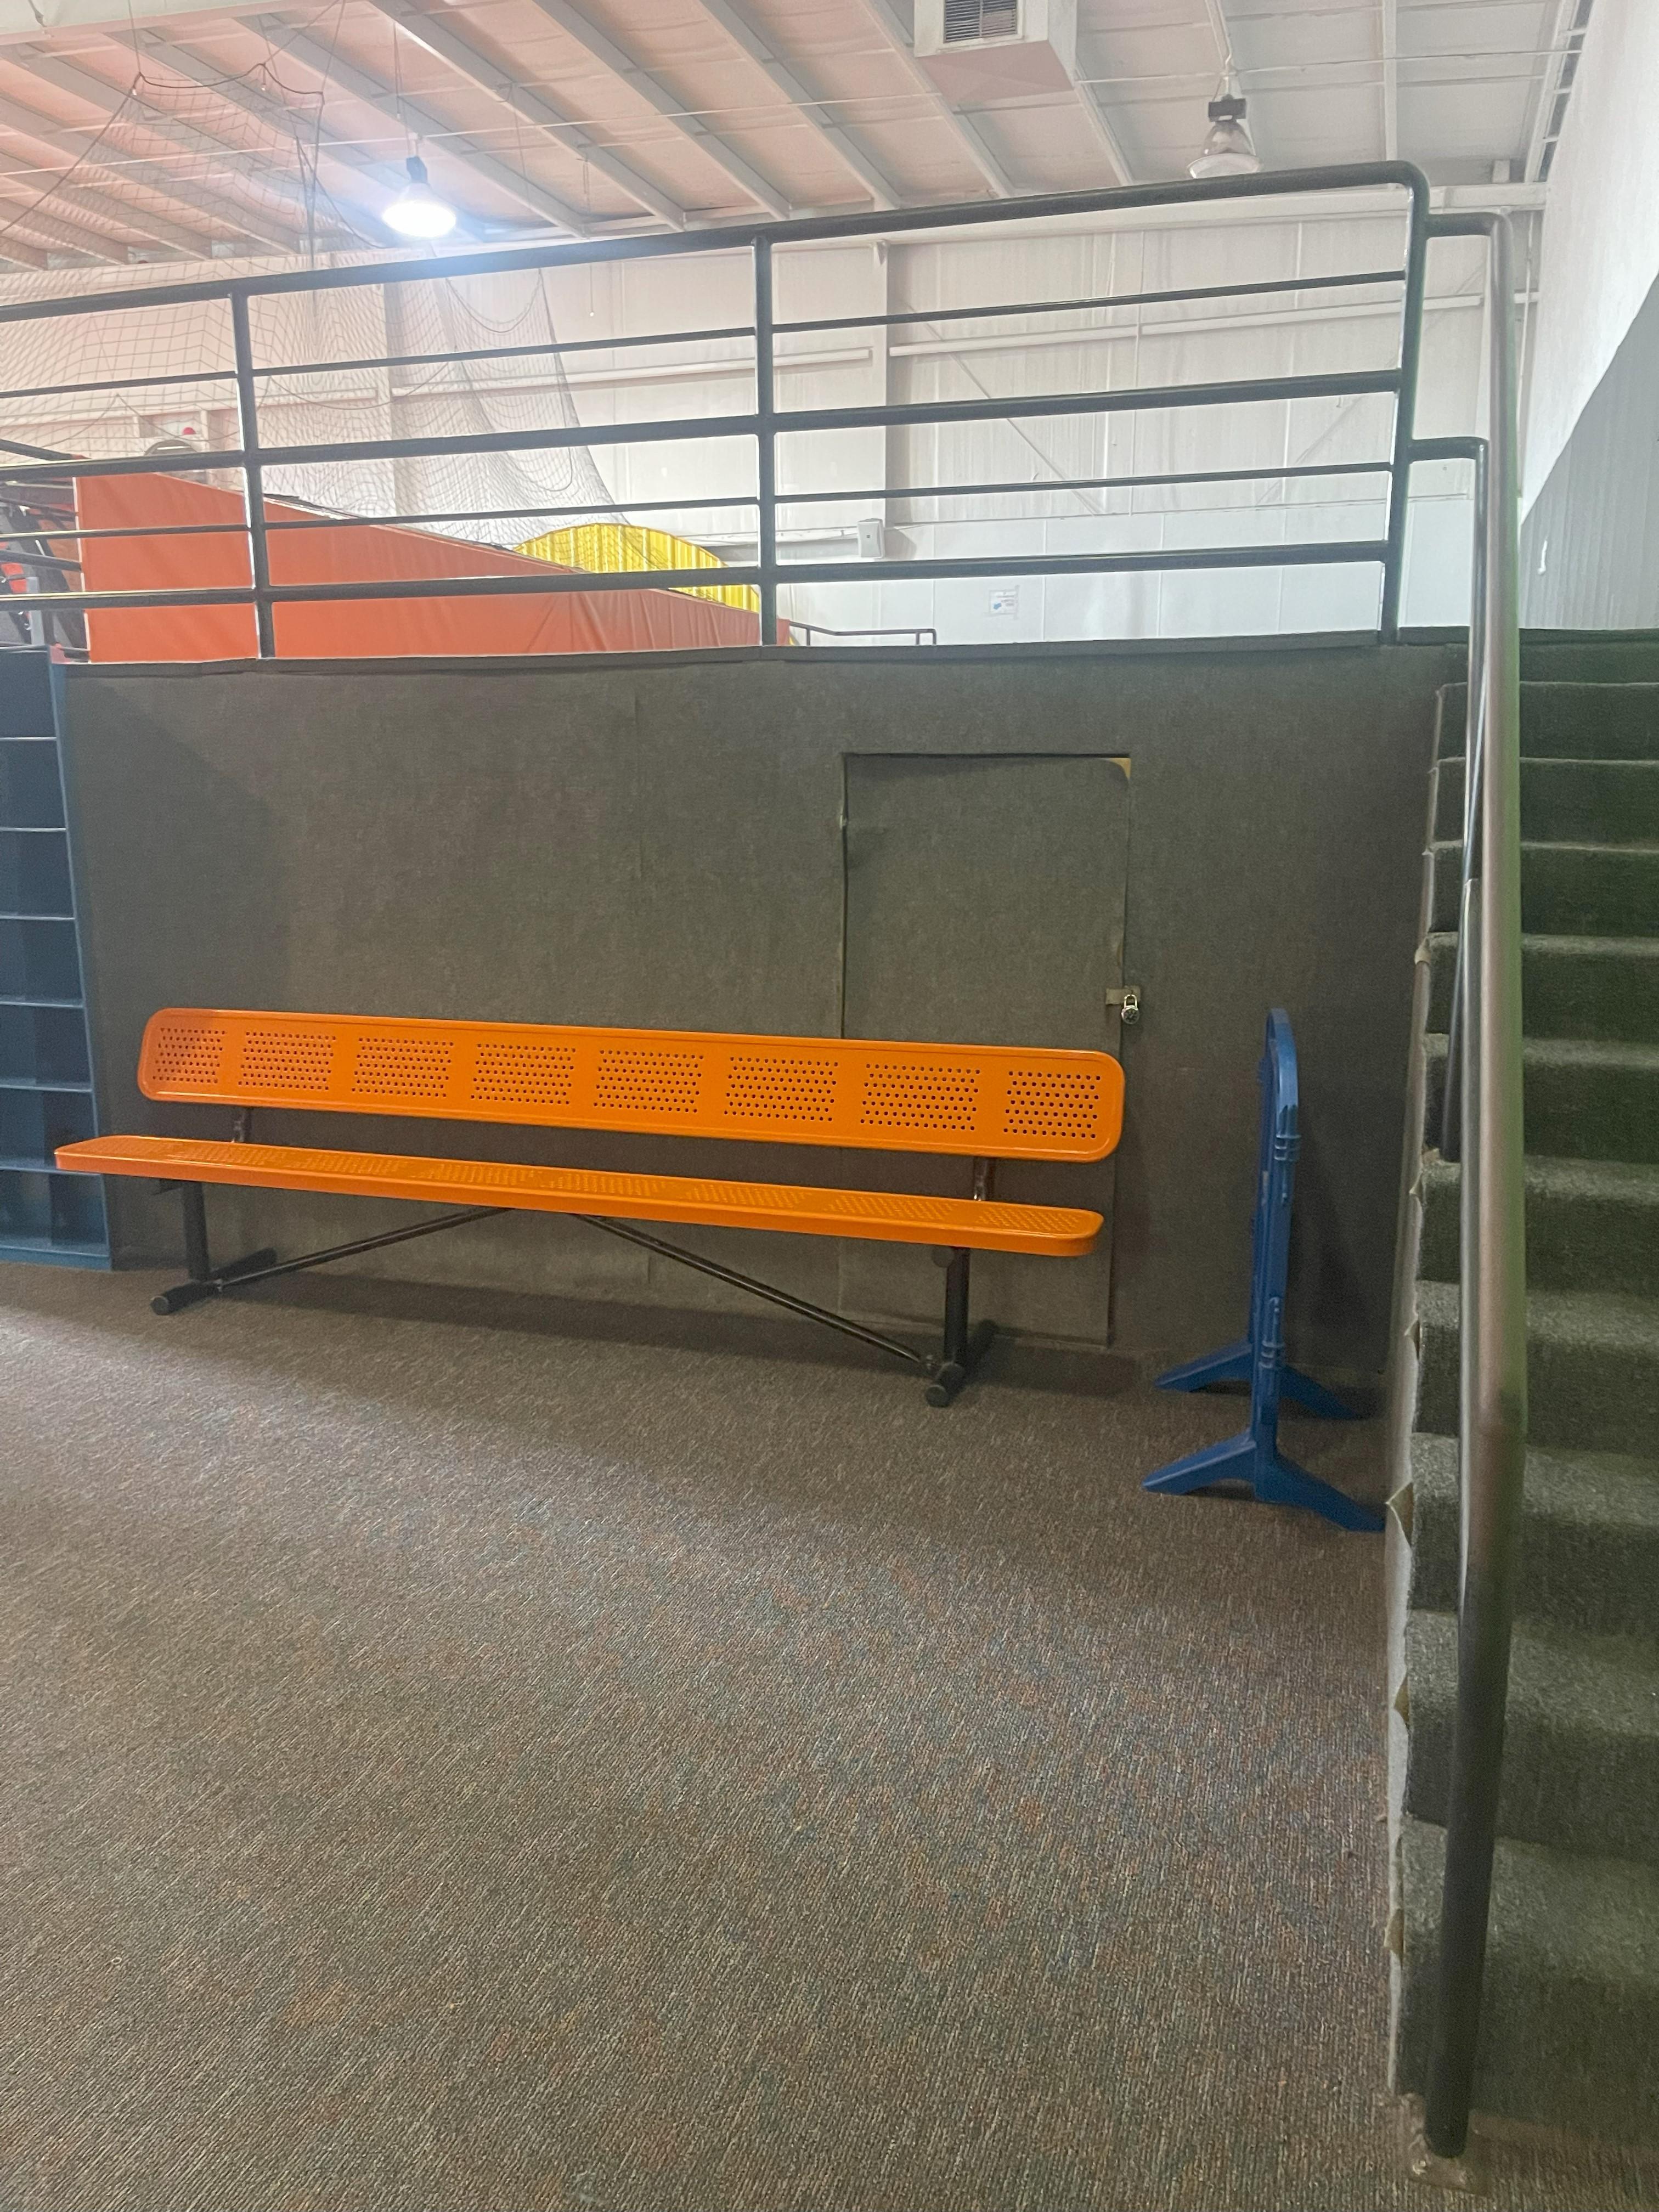 (2) orange steel benches with backs